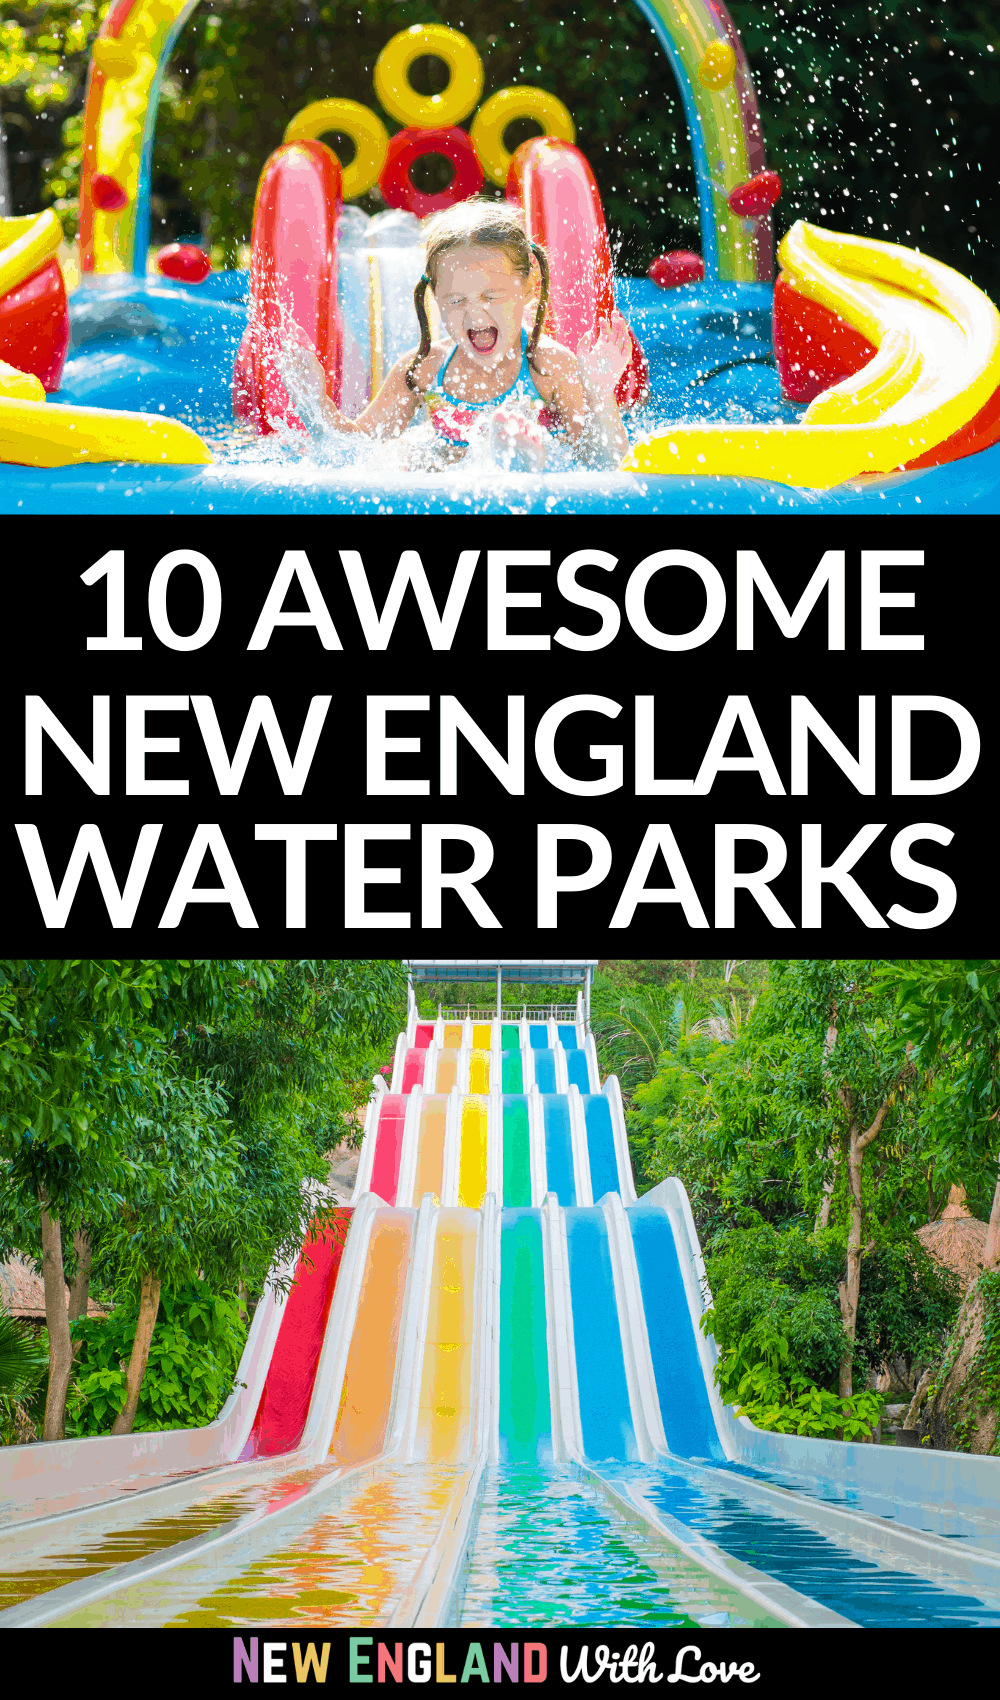 Pinterest graphic reading "10 AWESOME NEW ENGLAND WATER PARKS"